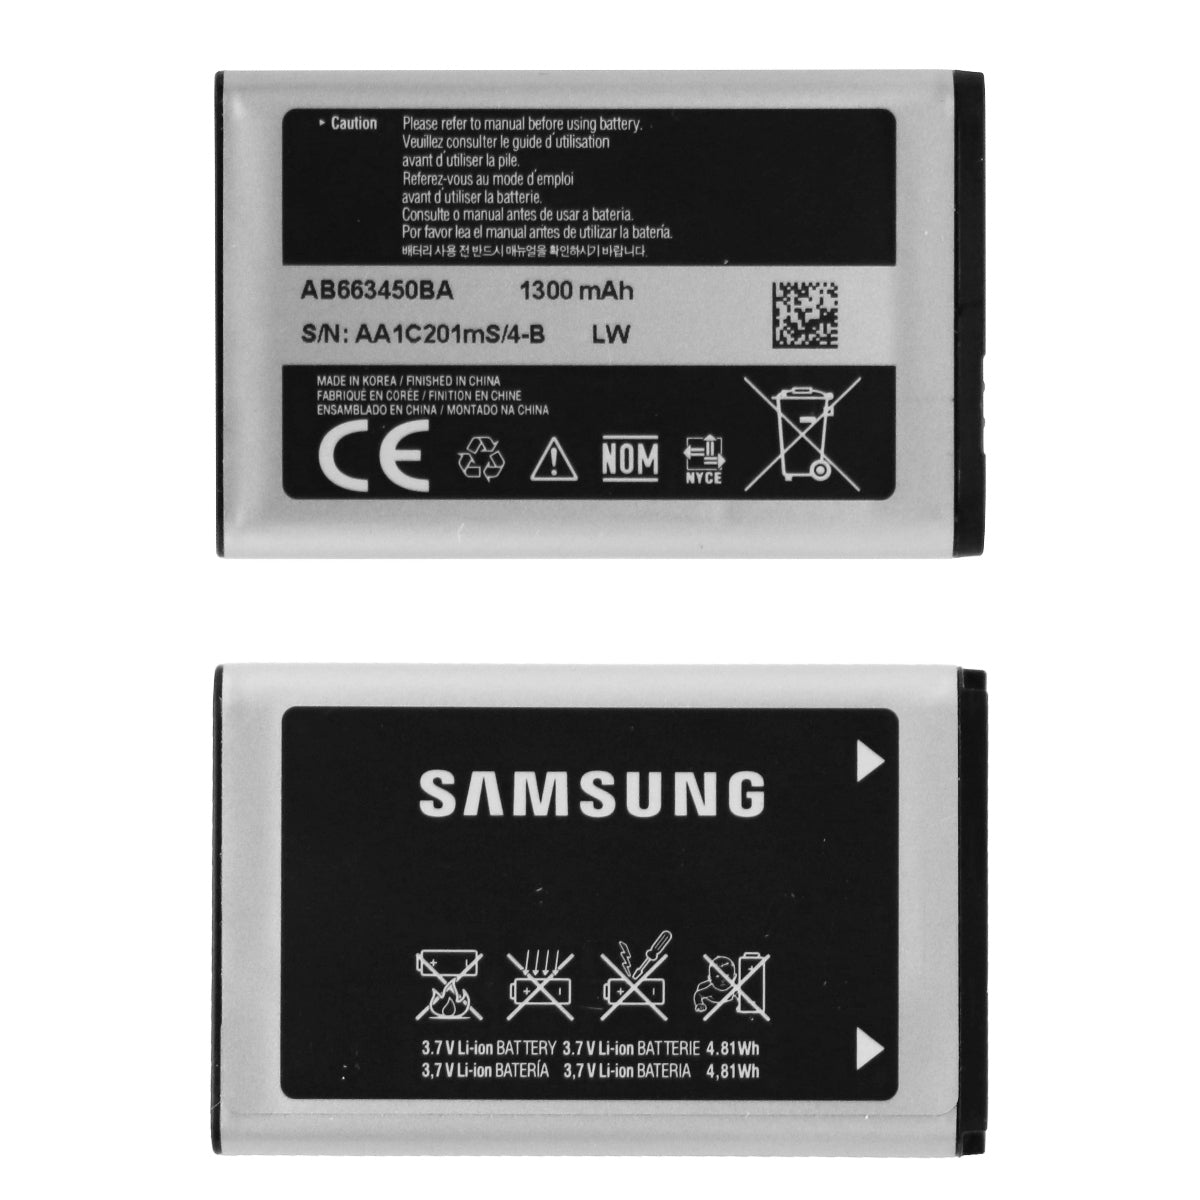 OEM Samsung AB663450BA 1300 mAh Replacement Battery for Samsung A847